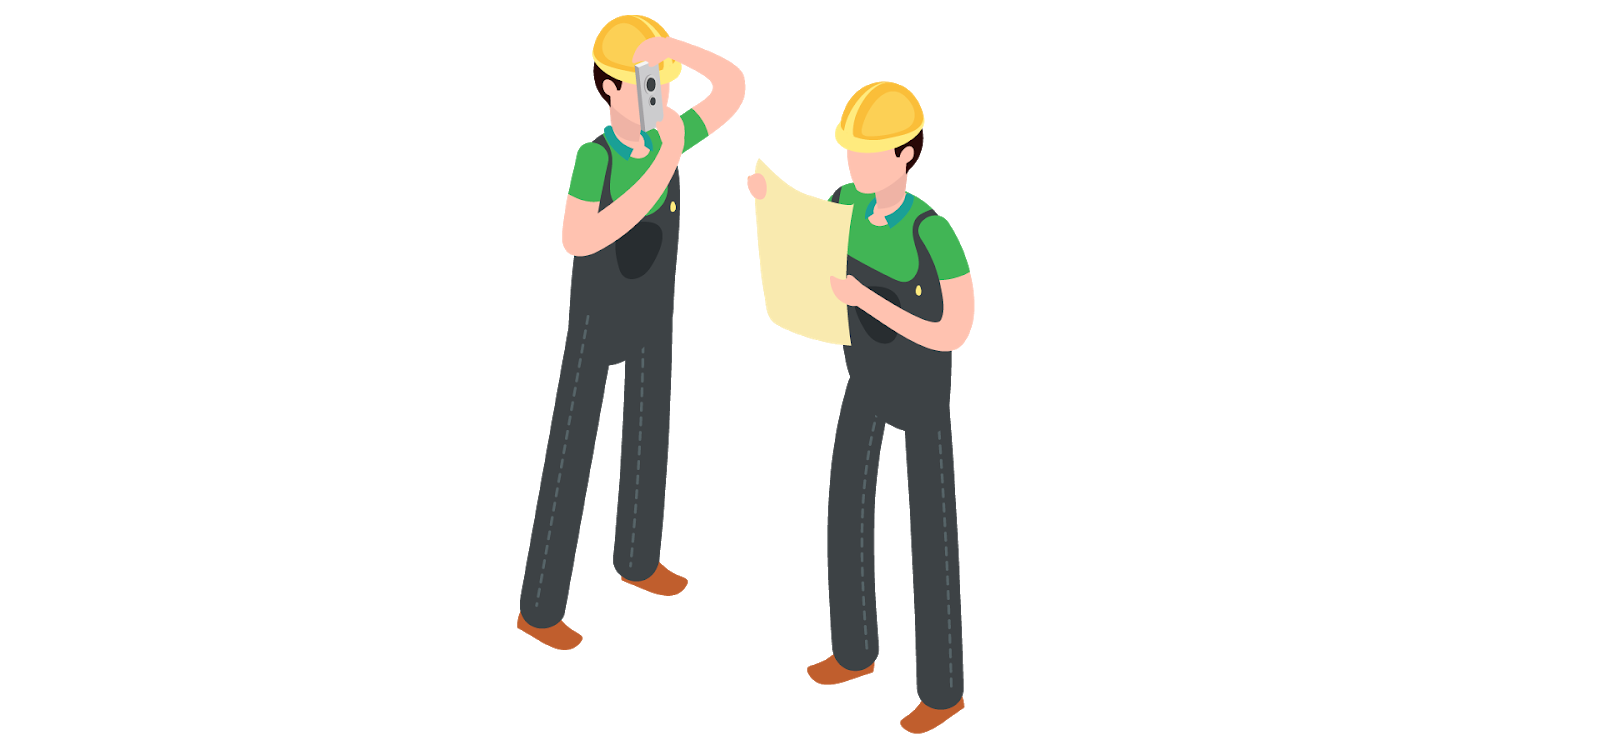 illustration of on-site workers using technology